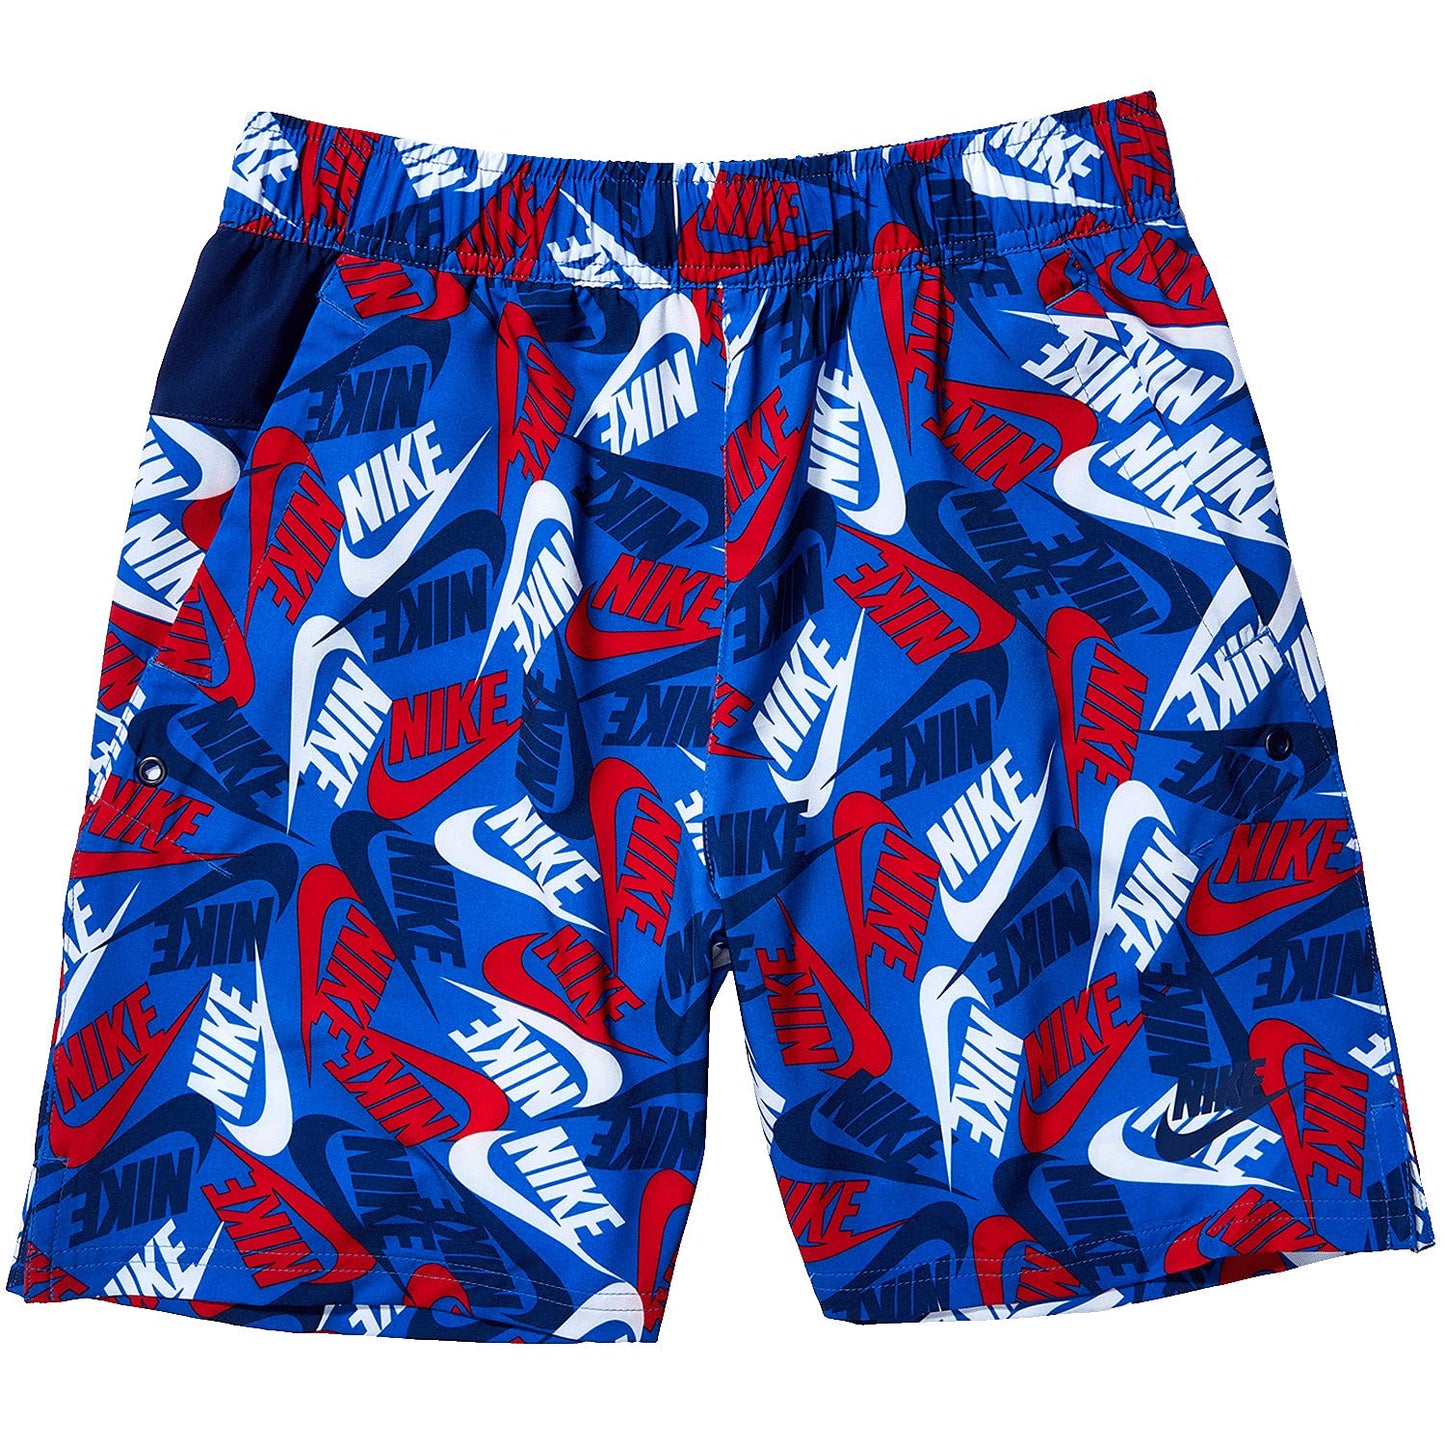 Image 1 of Sportswear Woven Print Shorts - Extended Size (Big Kids)